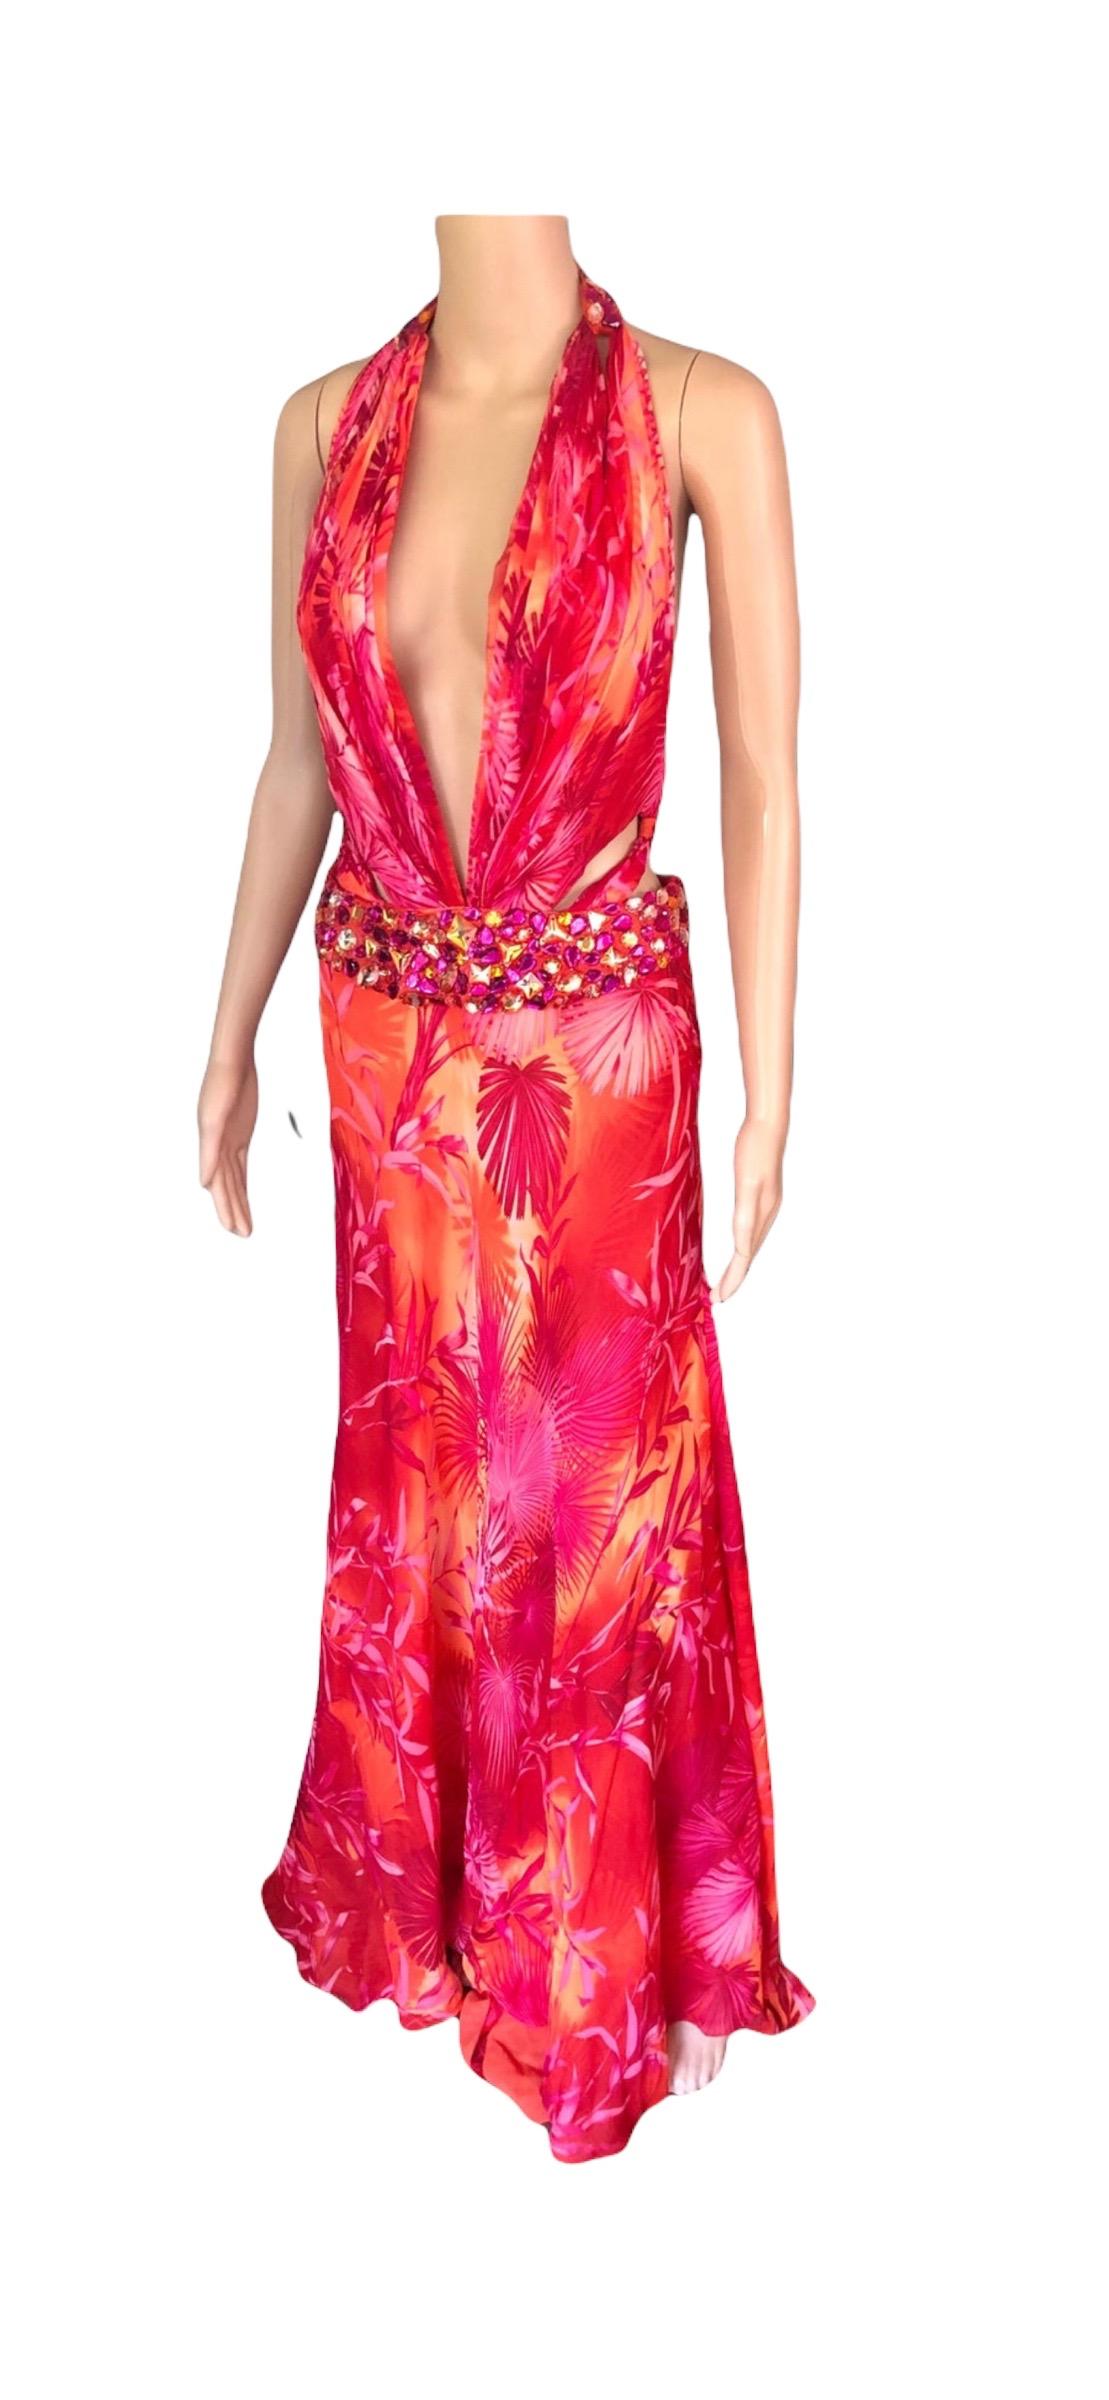 Red Gianni Versace S/S 2000 Runway Embellished Jungle Print Evening Dress Gown